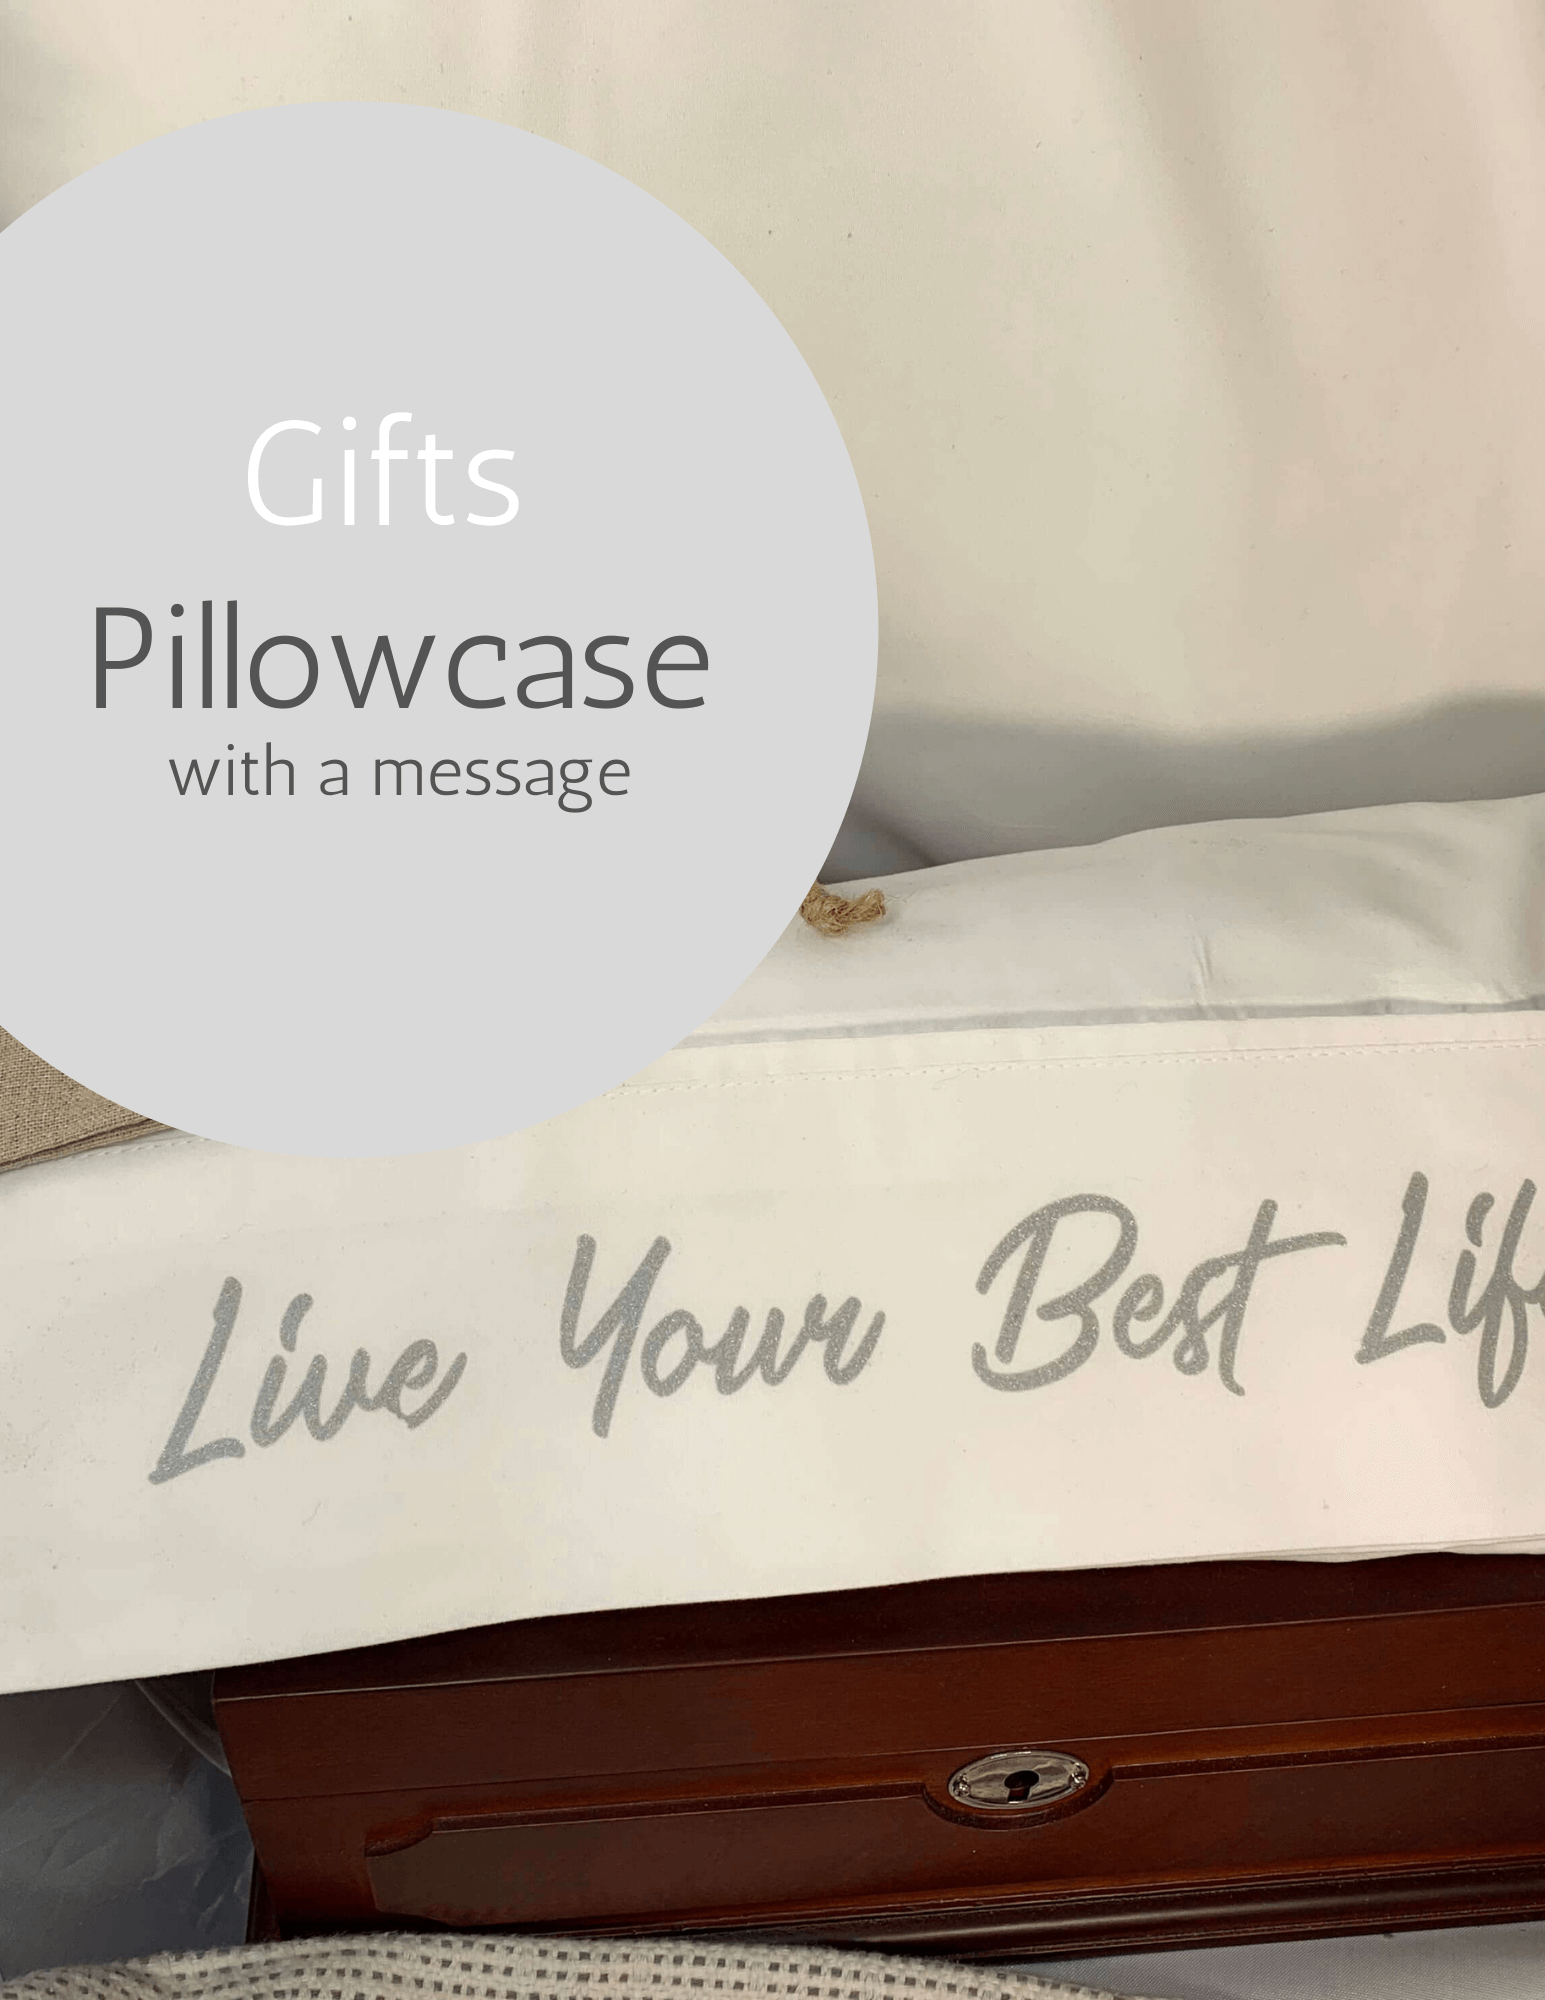 Live Your Best Life - Pillowcase with a Message